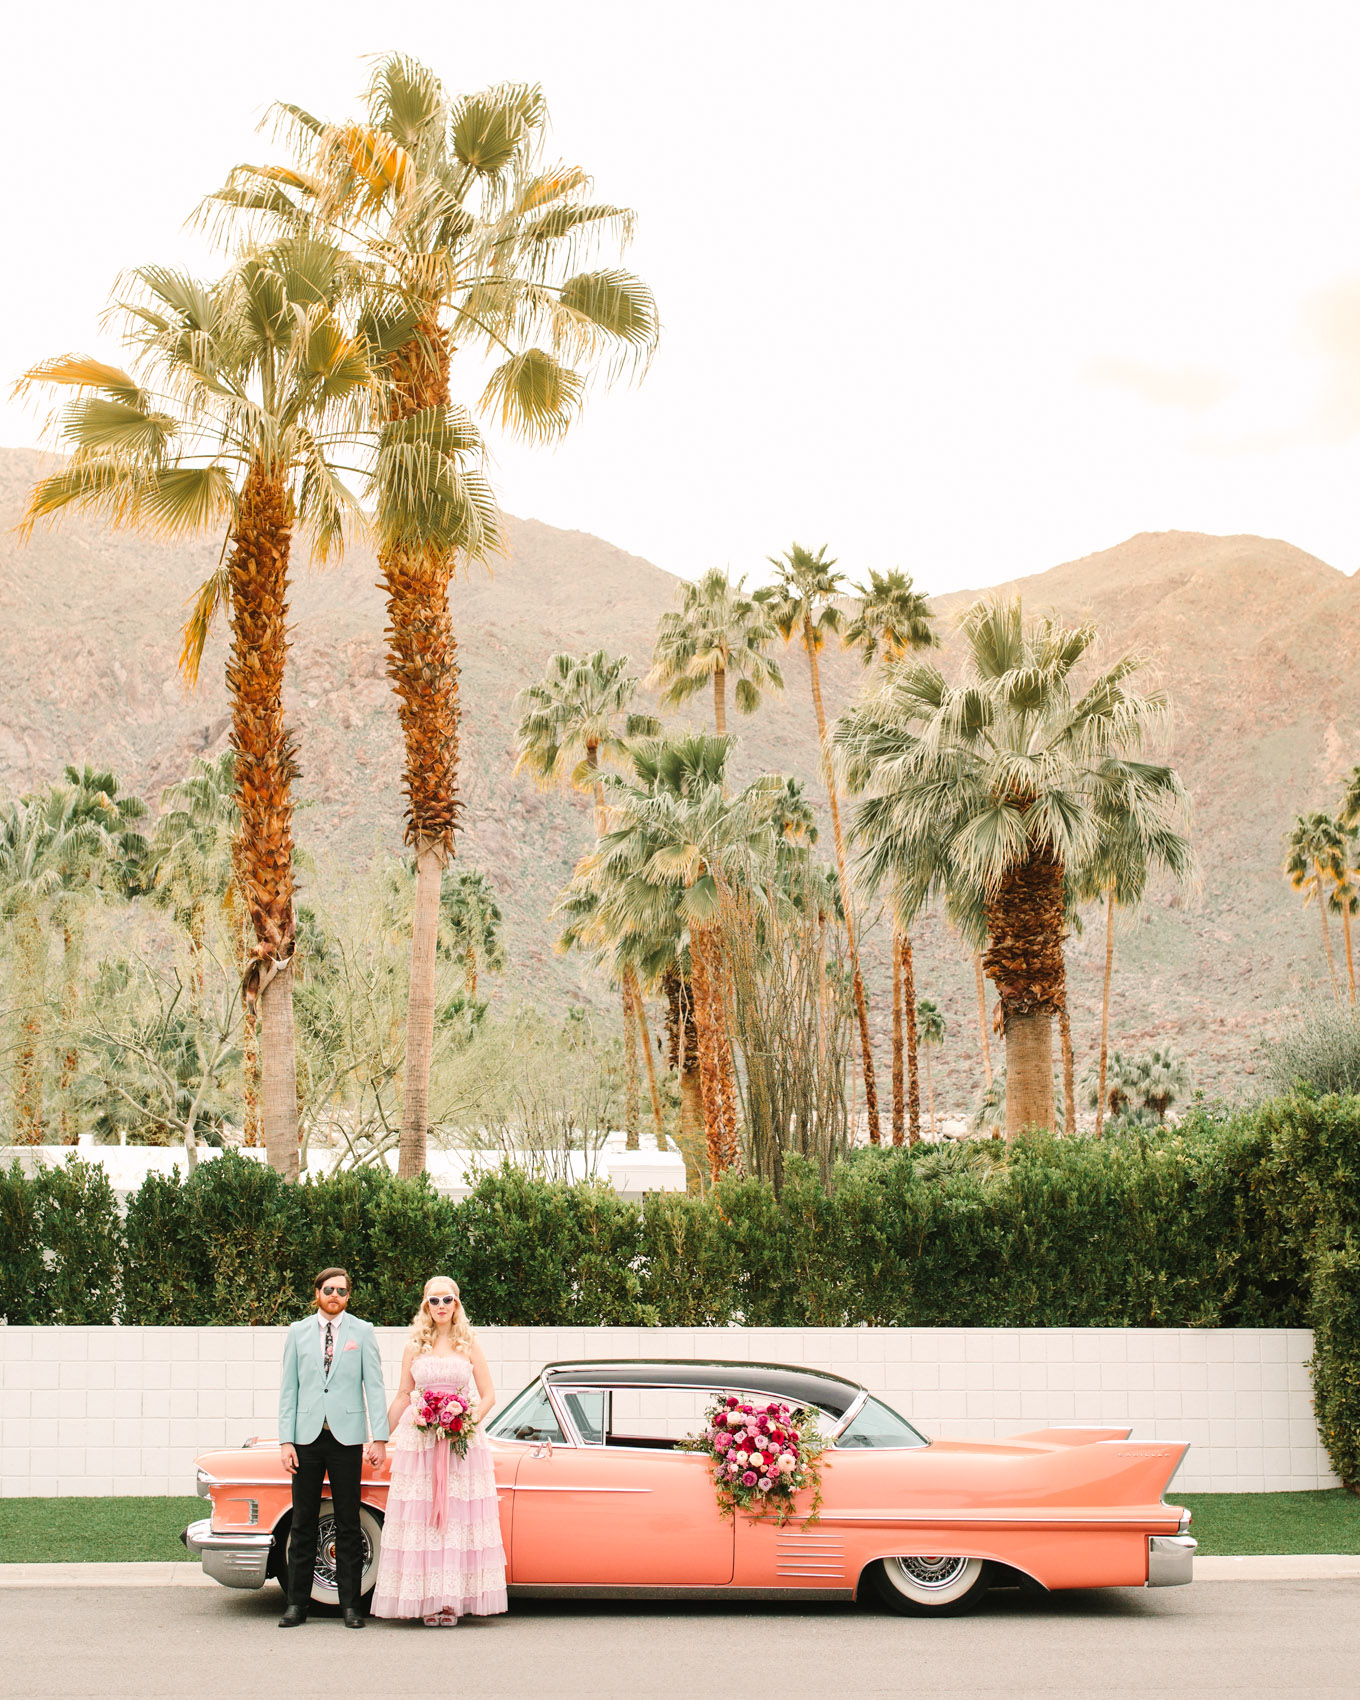 Couple with pink classic car. Modern vintage-inspired Palm Springs engagement session with a 1960s Cadillac, retro clothing, and flowers by Shindig Chic. | Colorful and elevated wedding inspiration for fun-loving couples in Southern California | #engagementsession #PalmSpringsengagement #vintageweddingdress #floralcar #pinkcar   Source: Mary Costa Photography | Los Angeles